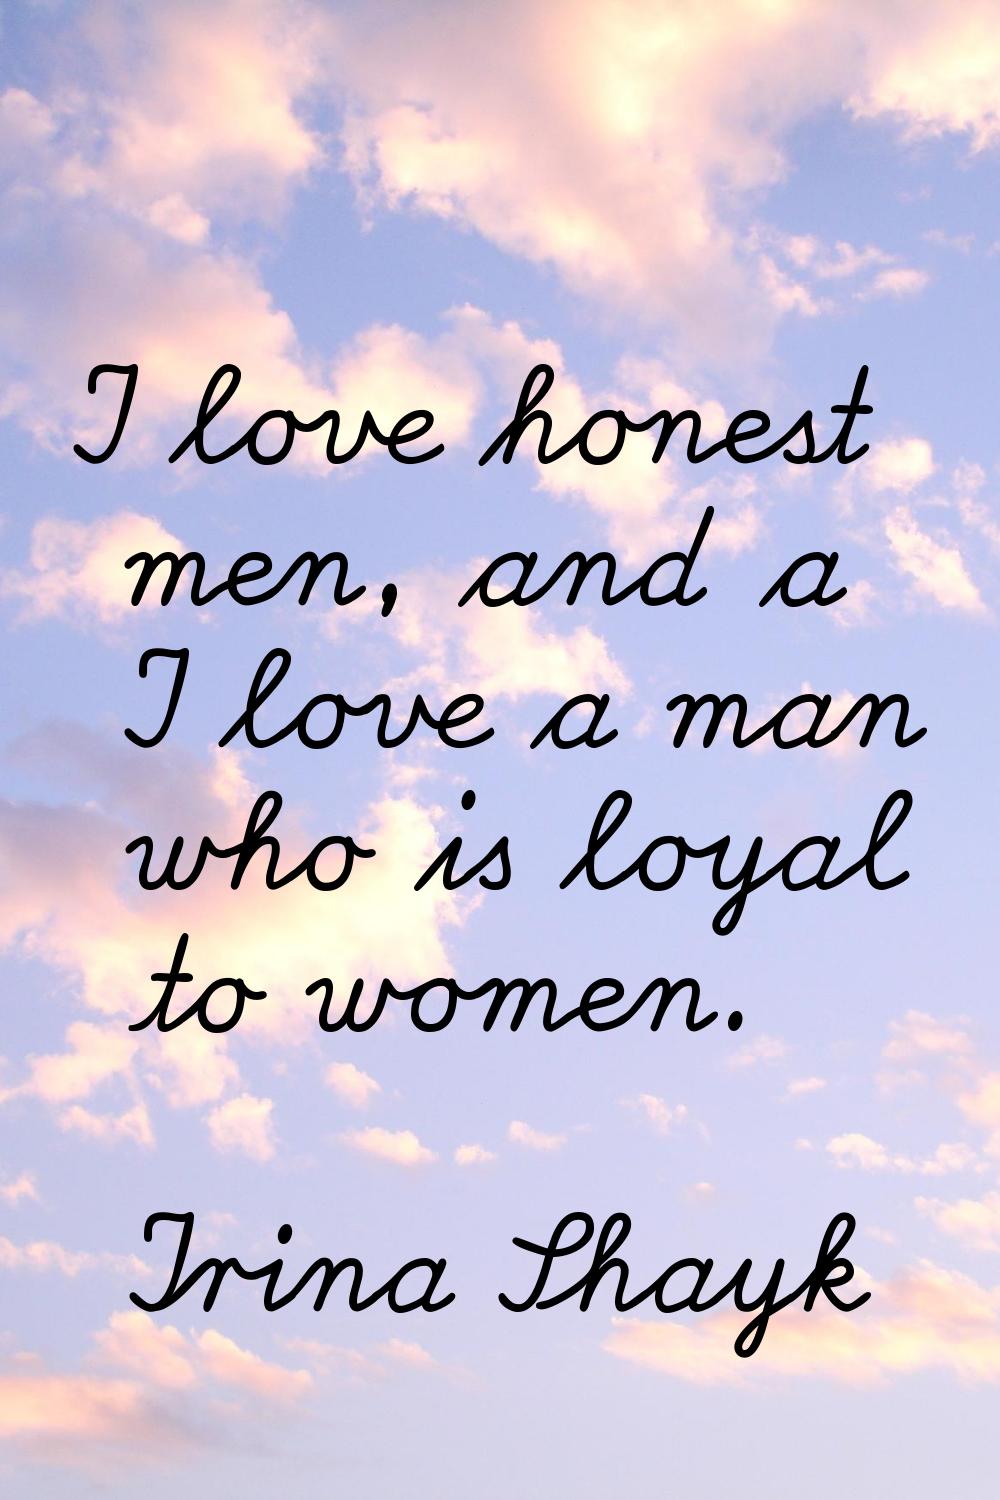 I love honest men, and a I love a man who is loyal to women.